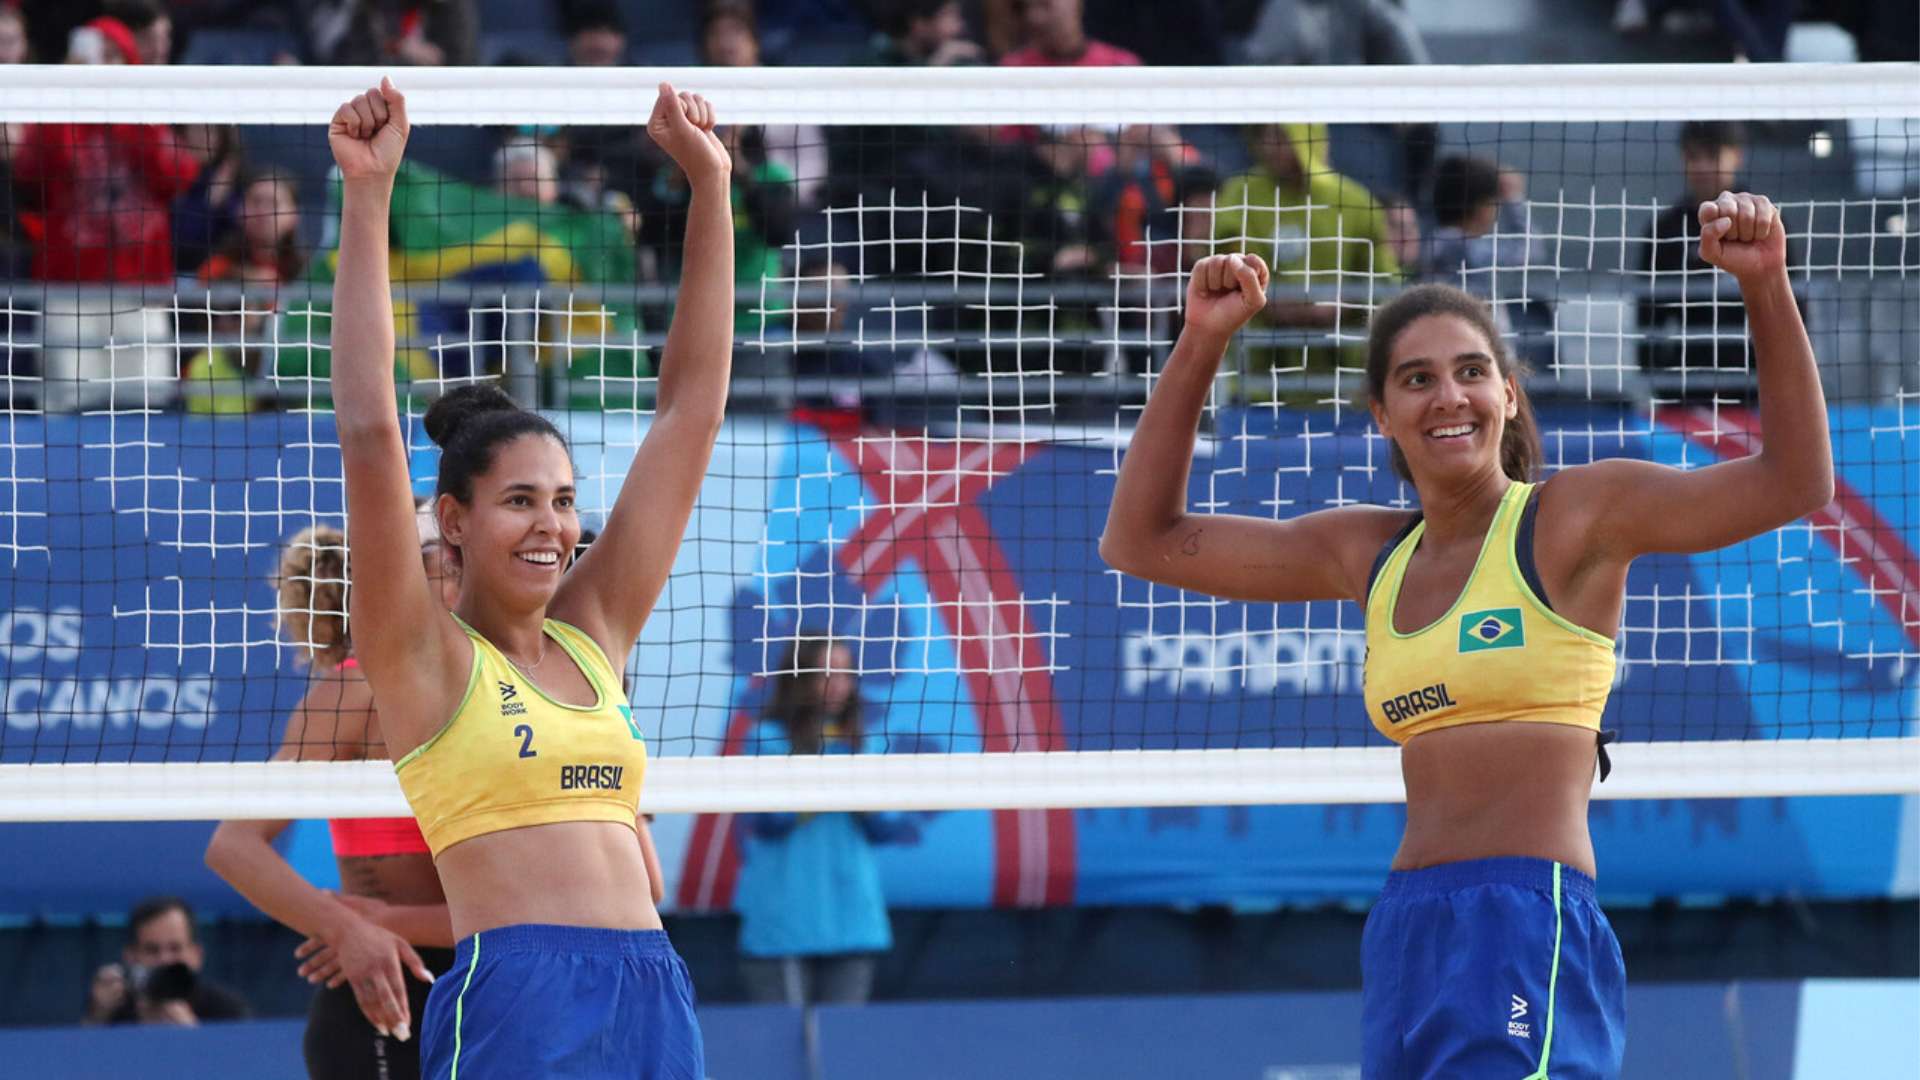 Brazil hangs itself the gold medal in beach volleyball